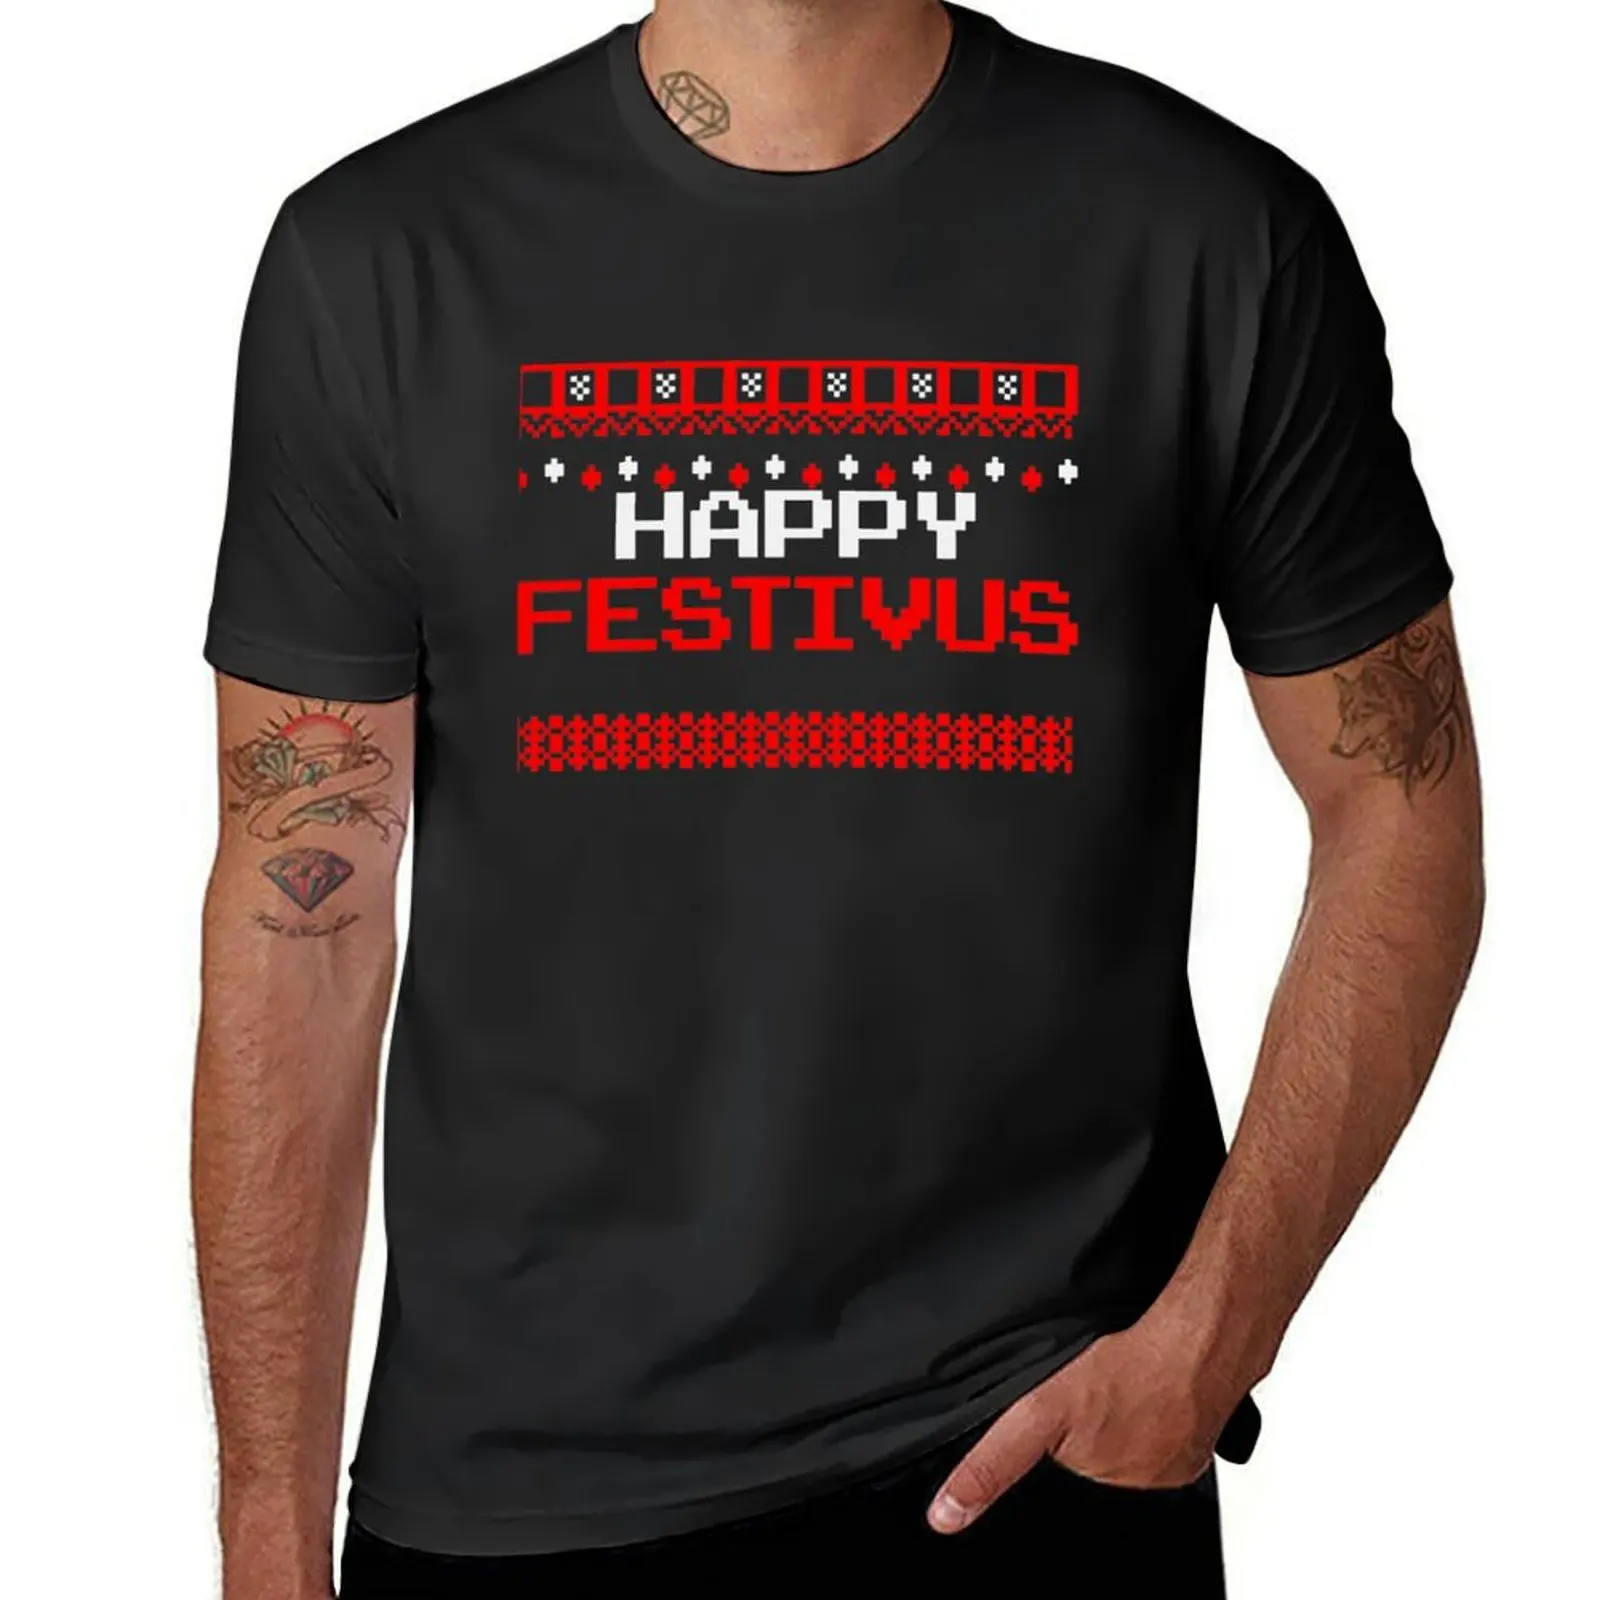 

Happy Festivus - Ugly Christmas Shirt T-Shirt funnys aesthetic clothes oversized funny t shirts for men